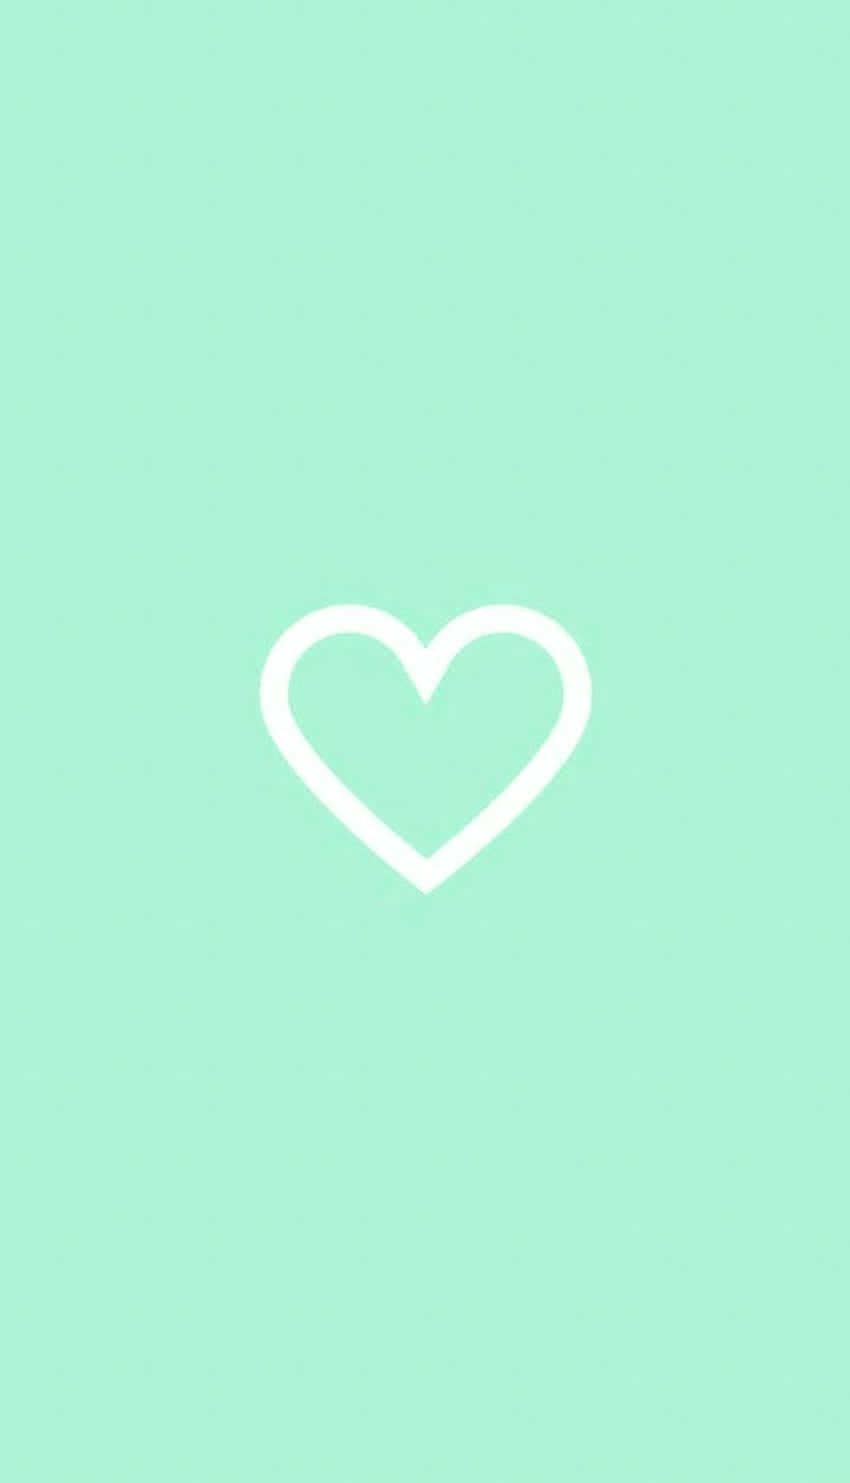 Love Isn’t Always Blue and White – Find Unexpected Joy and Excitement with Mint Green Hearts Wallpaper